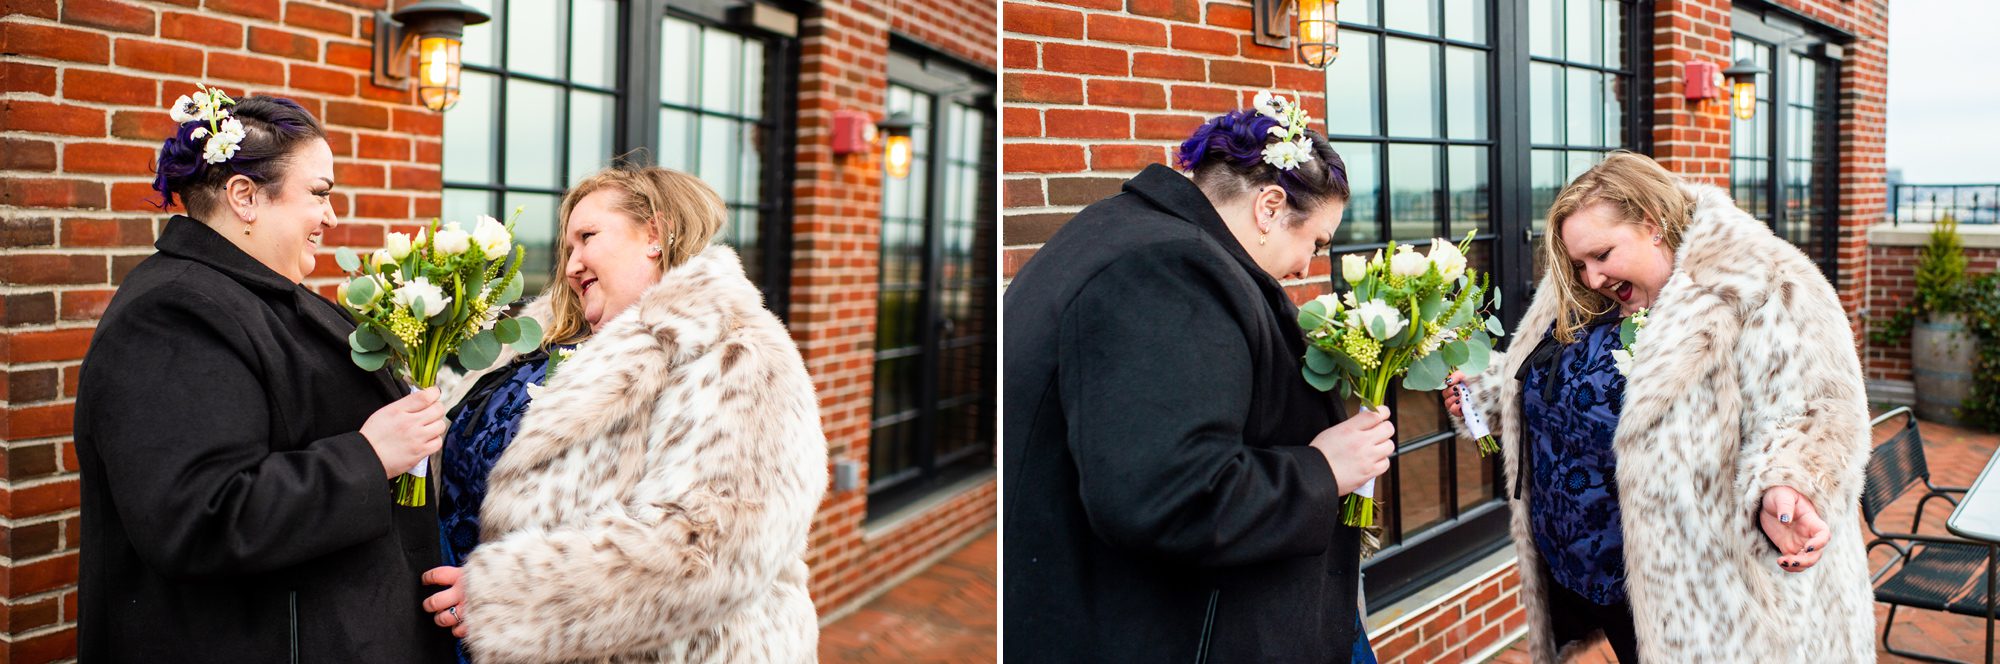 First Look at Queer Wedding NYC